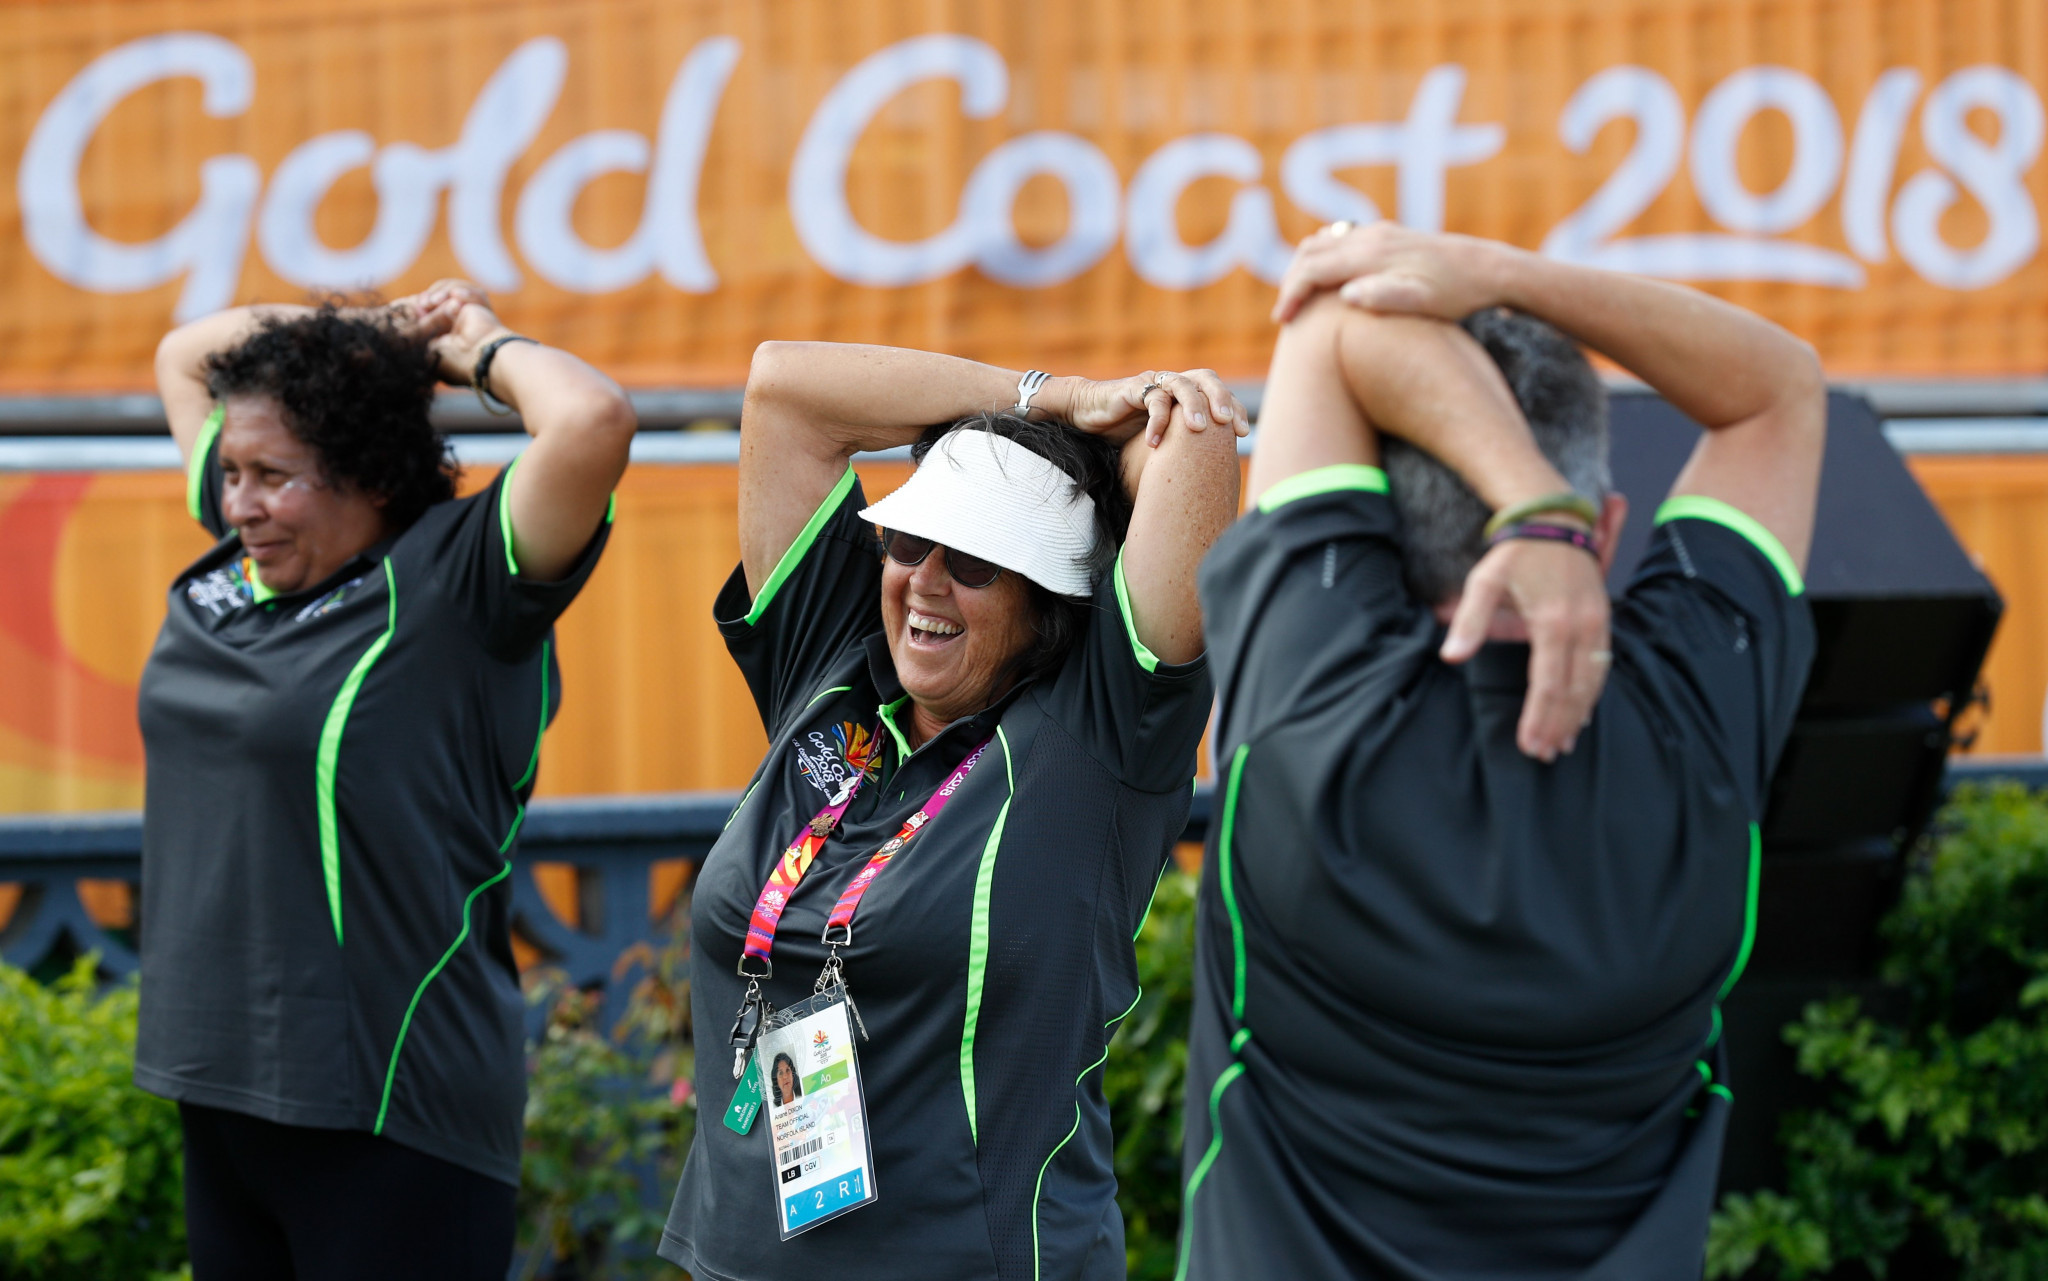 Norfolk Island's Carmen Anderson, pictured here on the right during the Gold Coast 2018 Commonwealth Games, occupies first place in section two of the women's event ©Getty Images